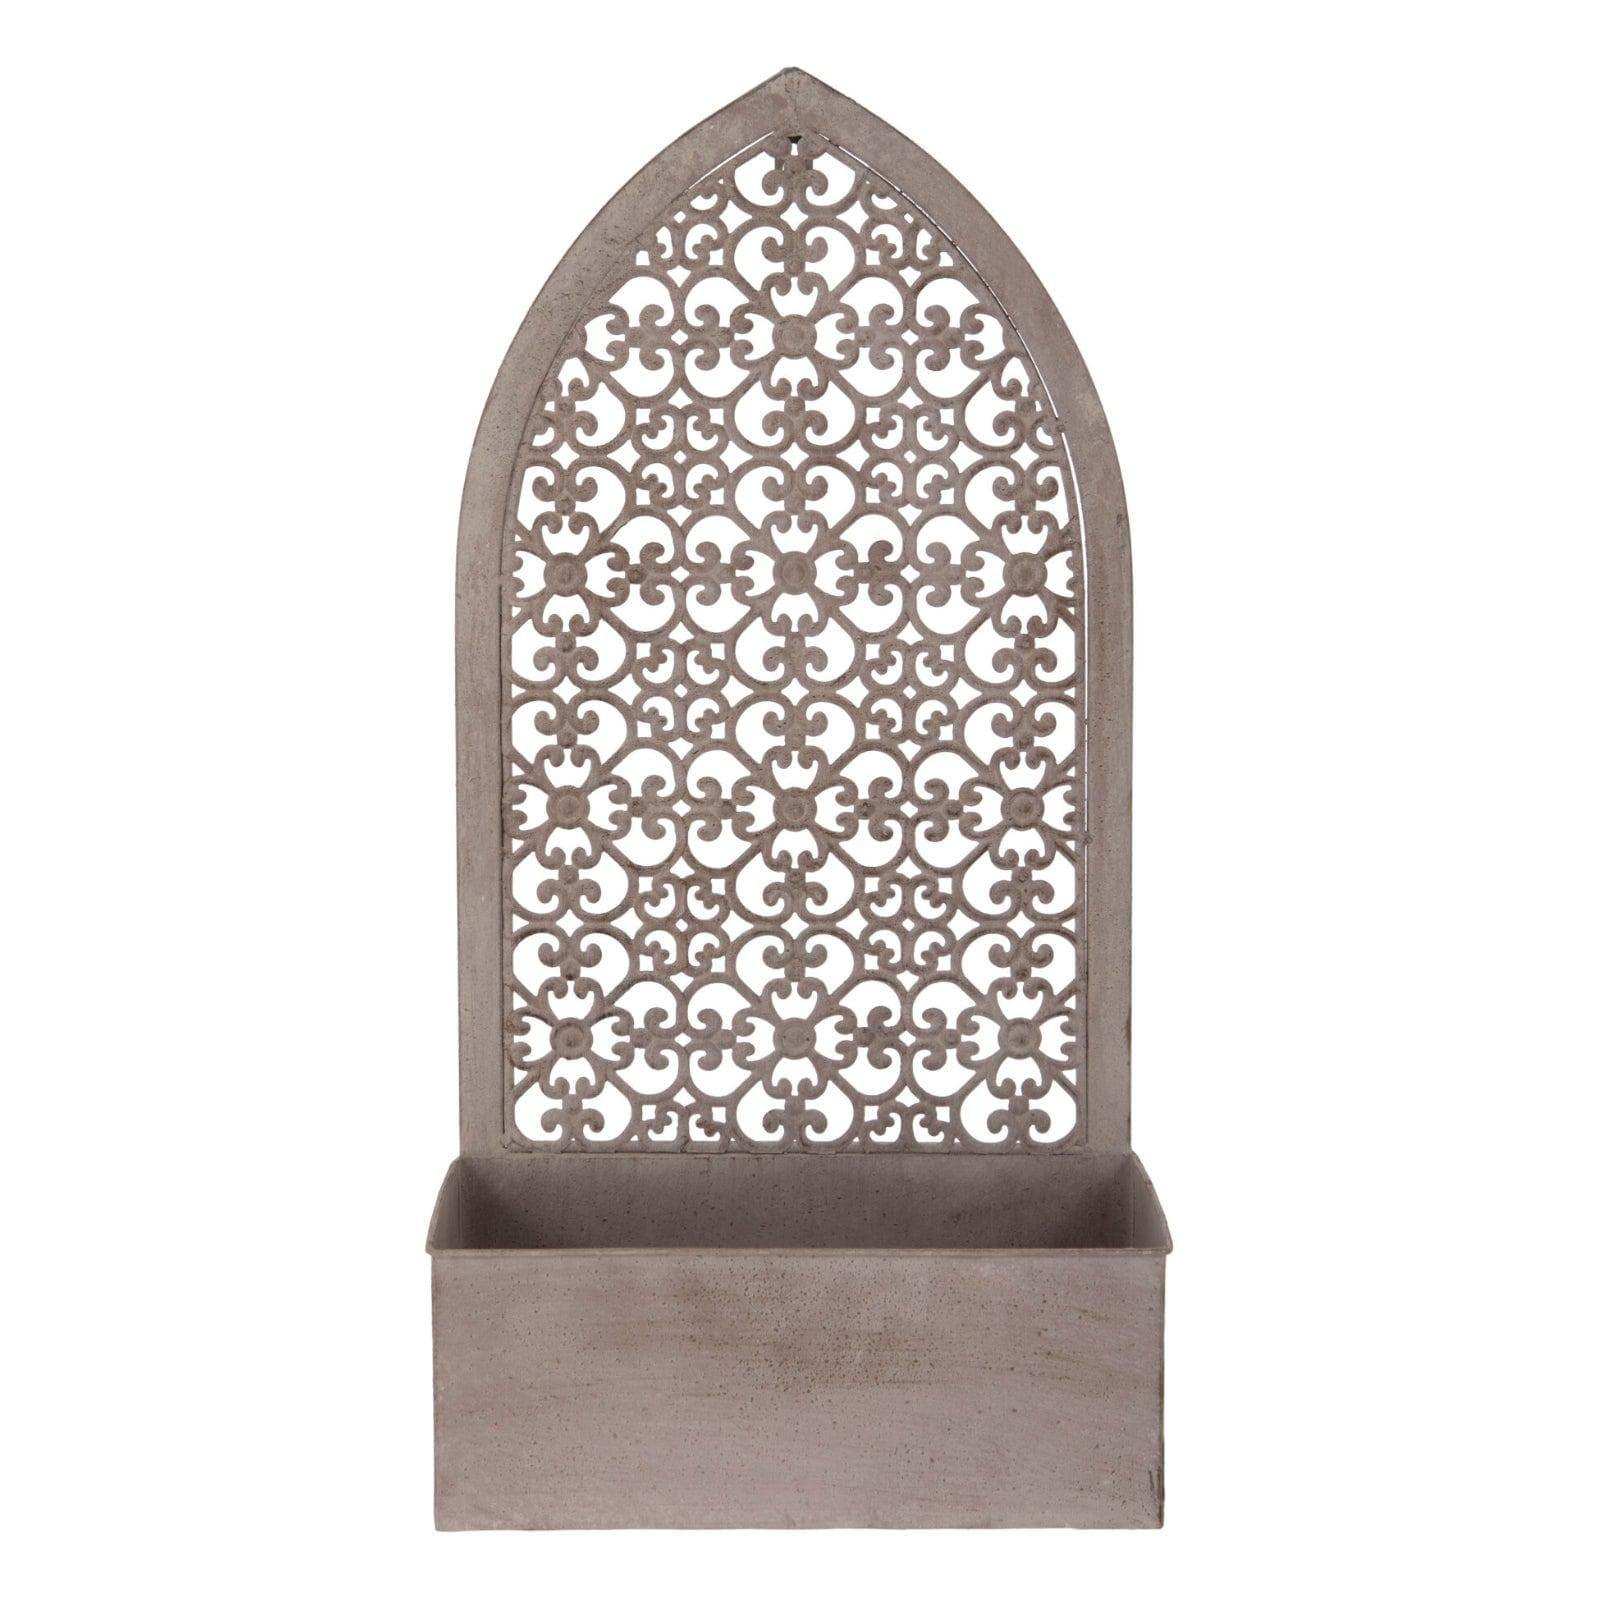 Moroccan Inspired Wall Planter Frame Trough - The Farthing